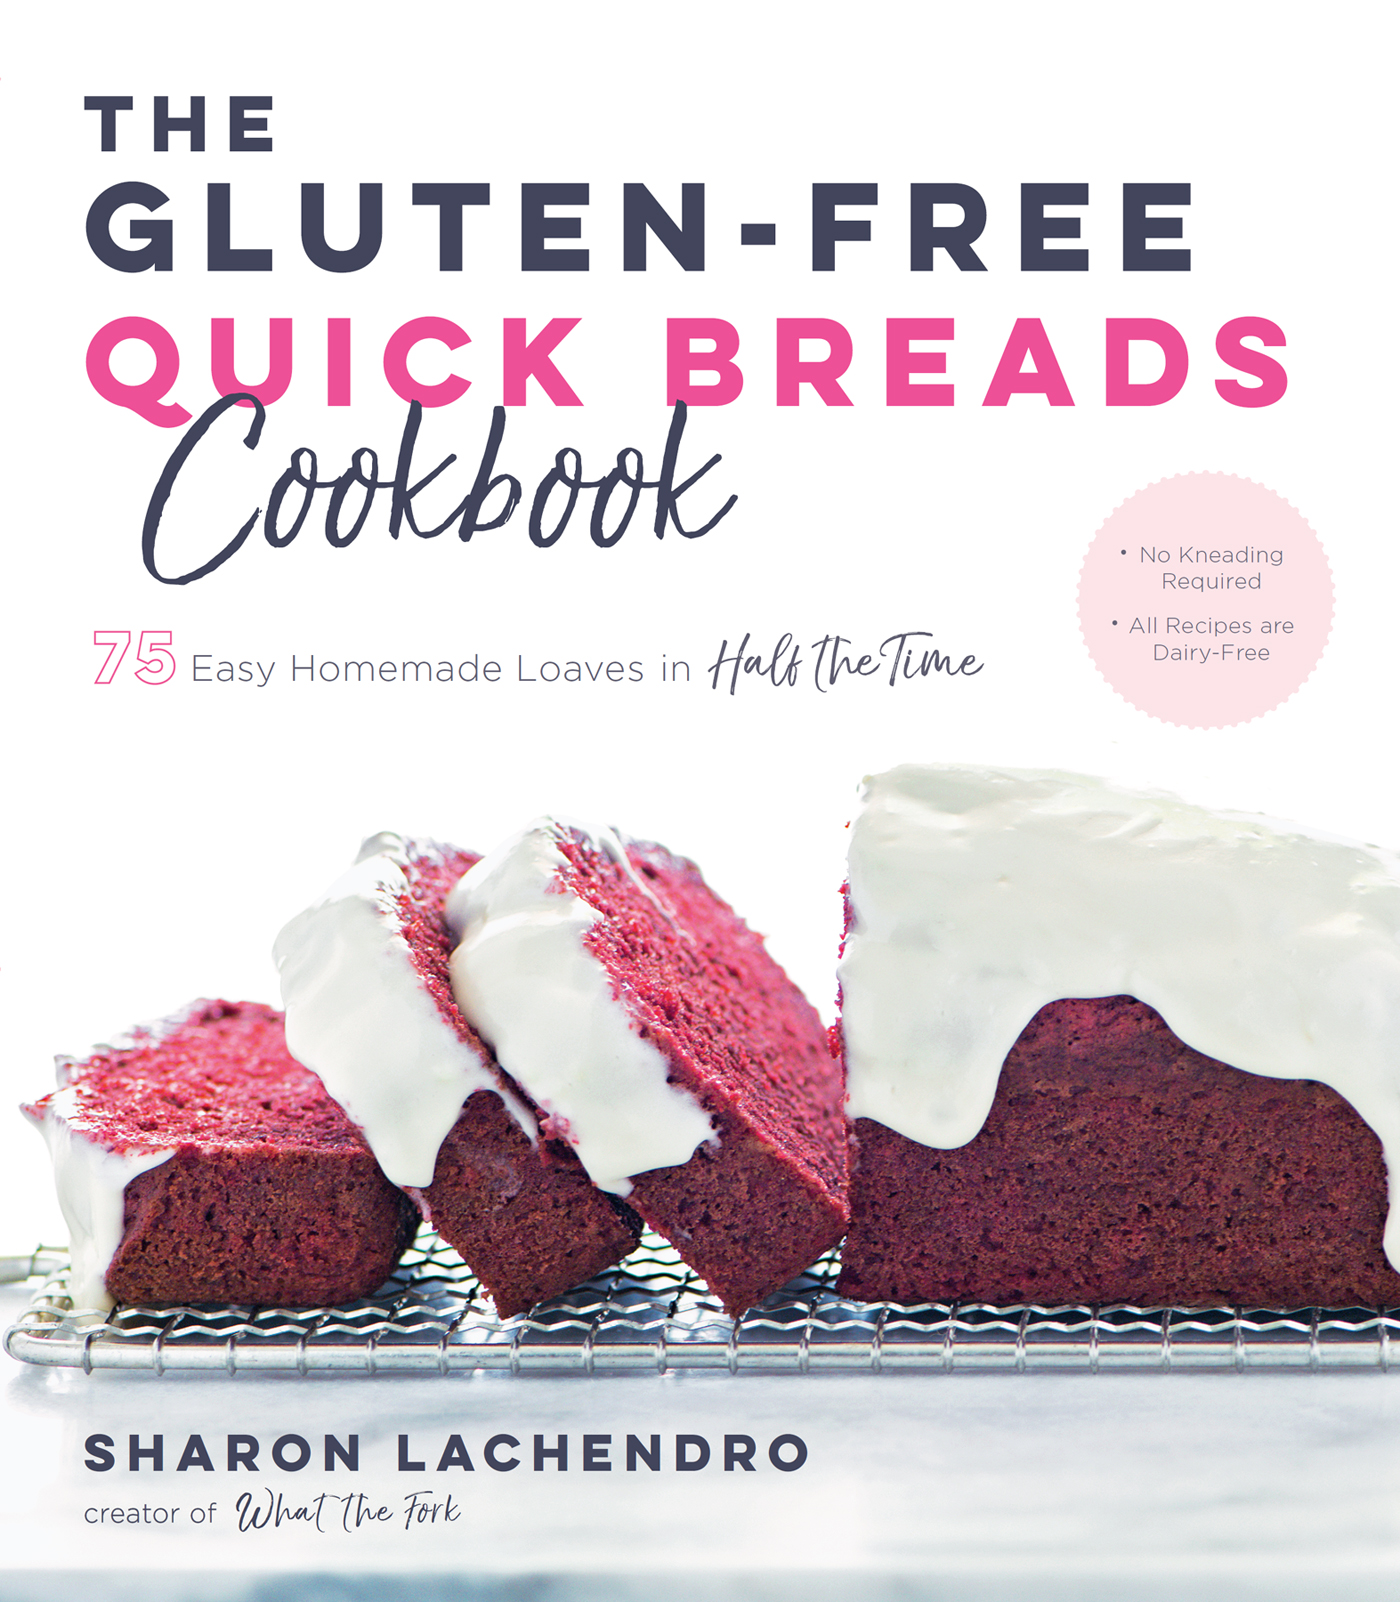 THE GLUTEN-FREE QUICK BREADS COOKBOOK 75 Easy Homemade Loaves in Half the Time - photo 1